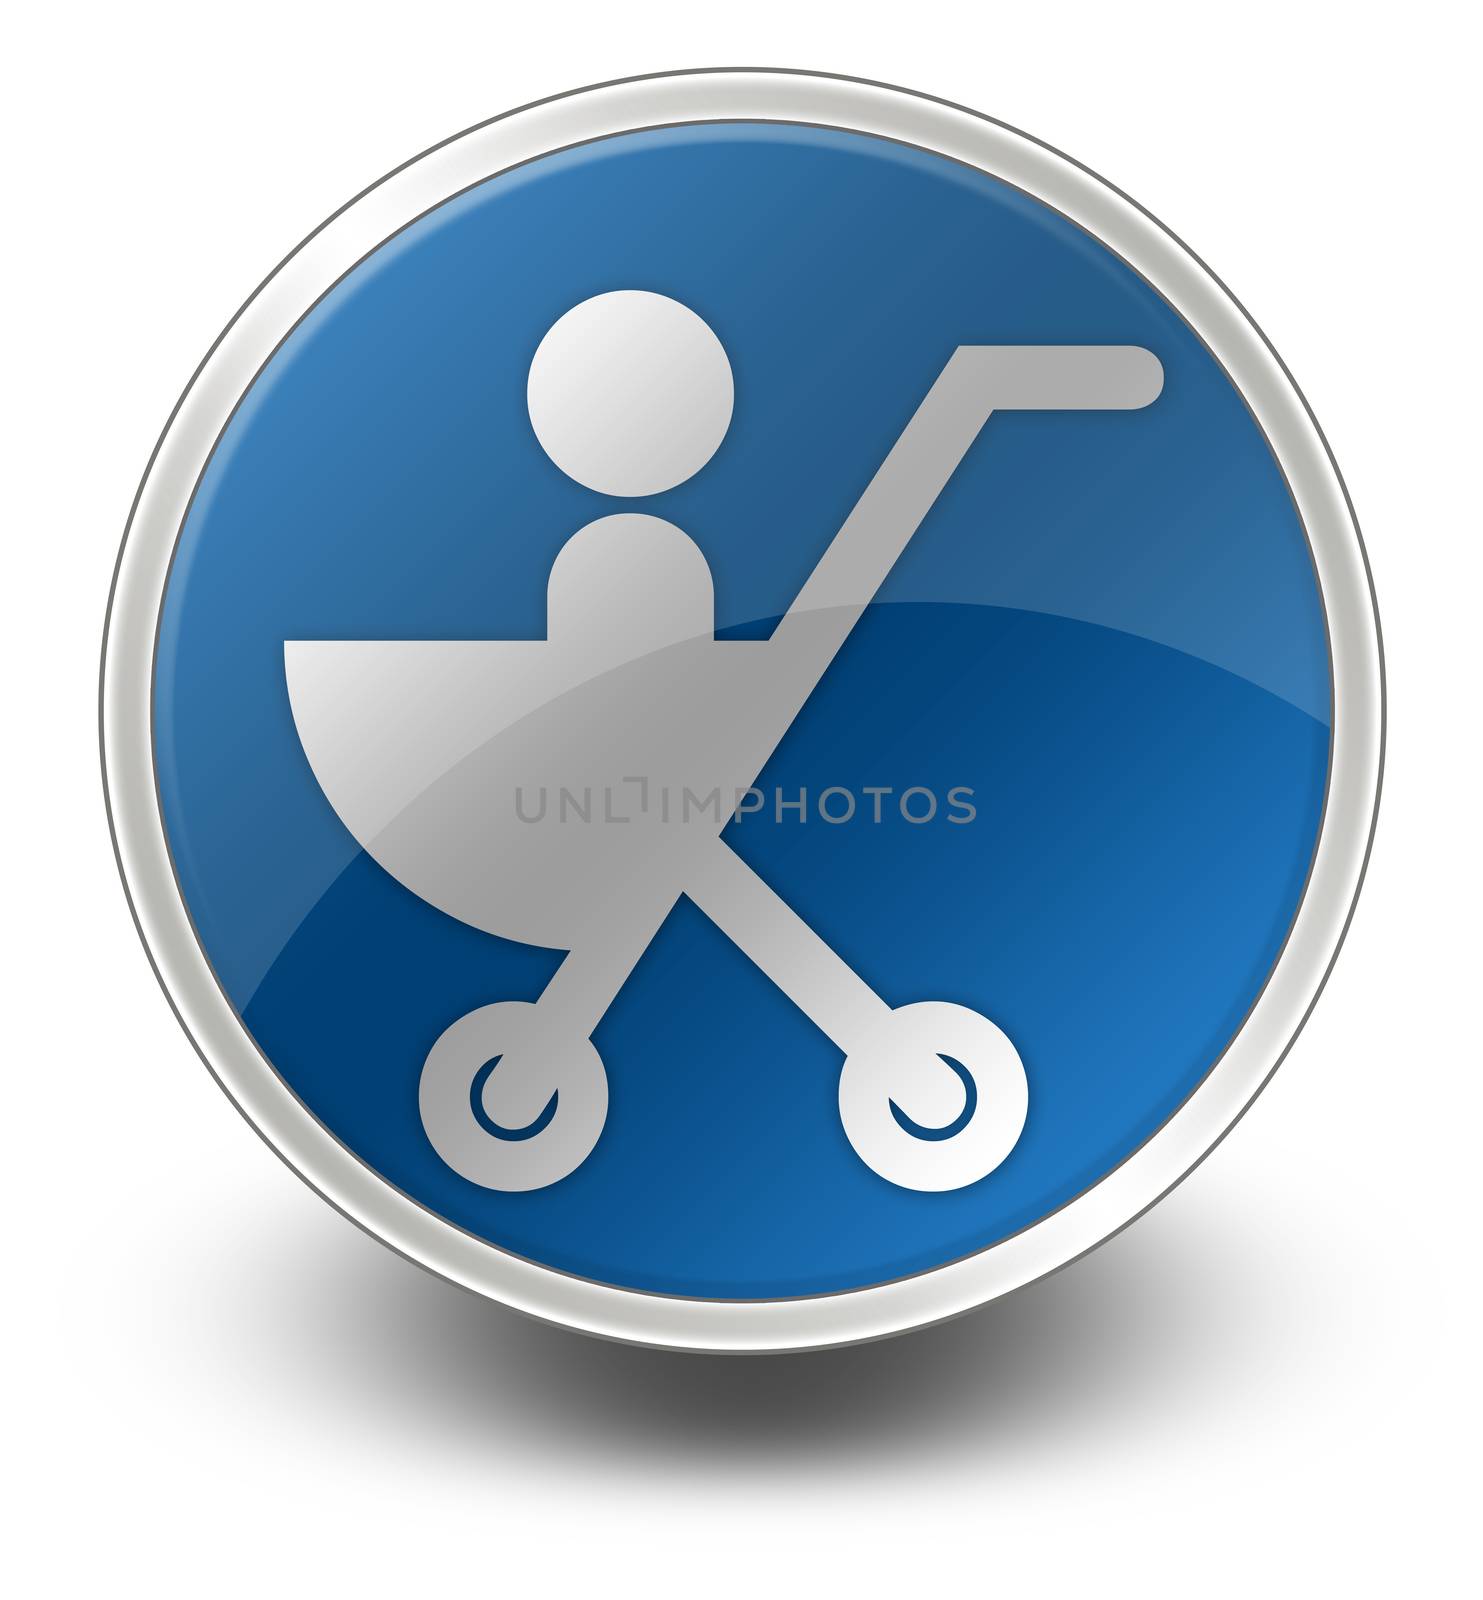 Icon, Button, Pictogram with Stroller symbol